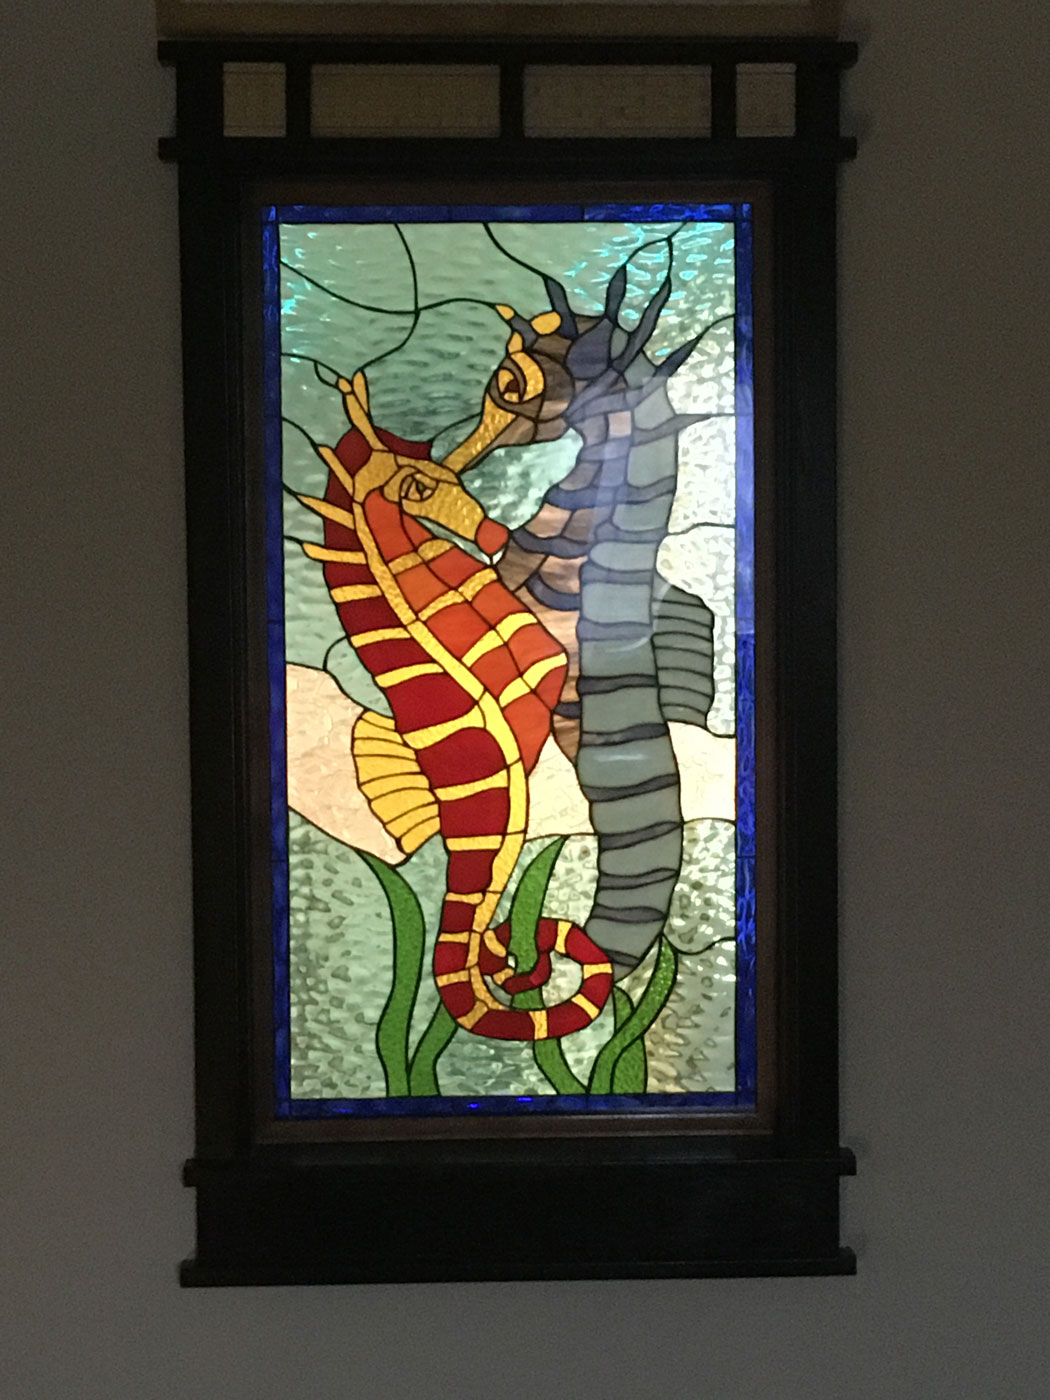 Stained Glass sealed within tempered glass , which customer framed in between two rooms.